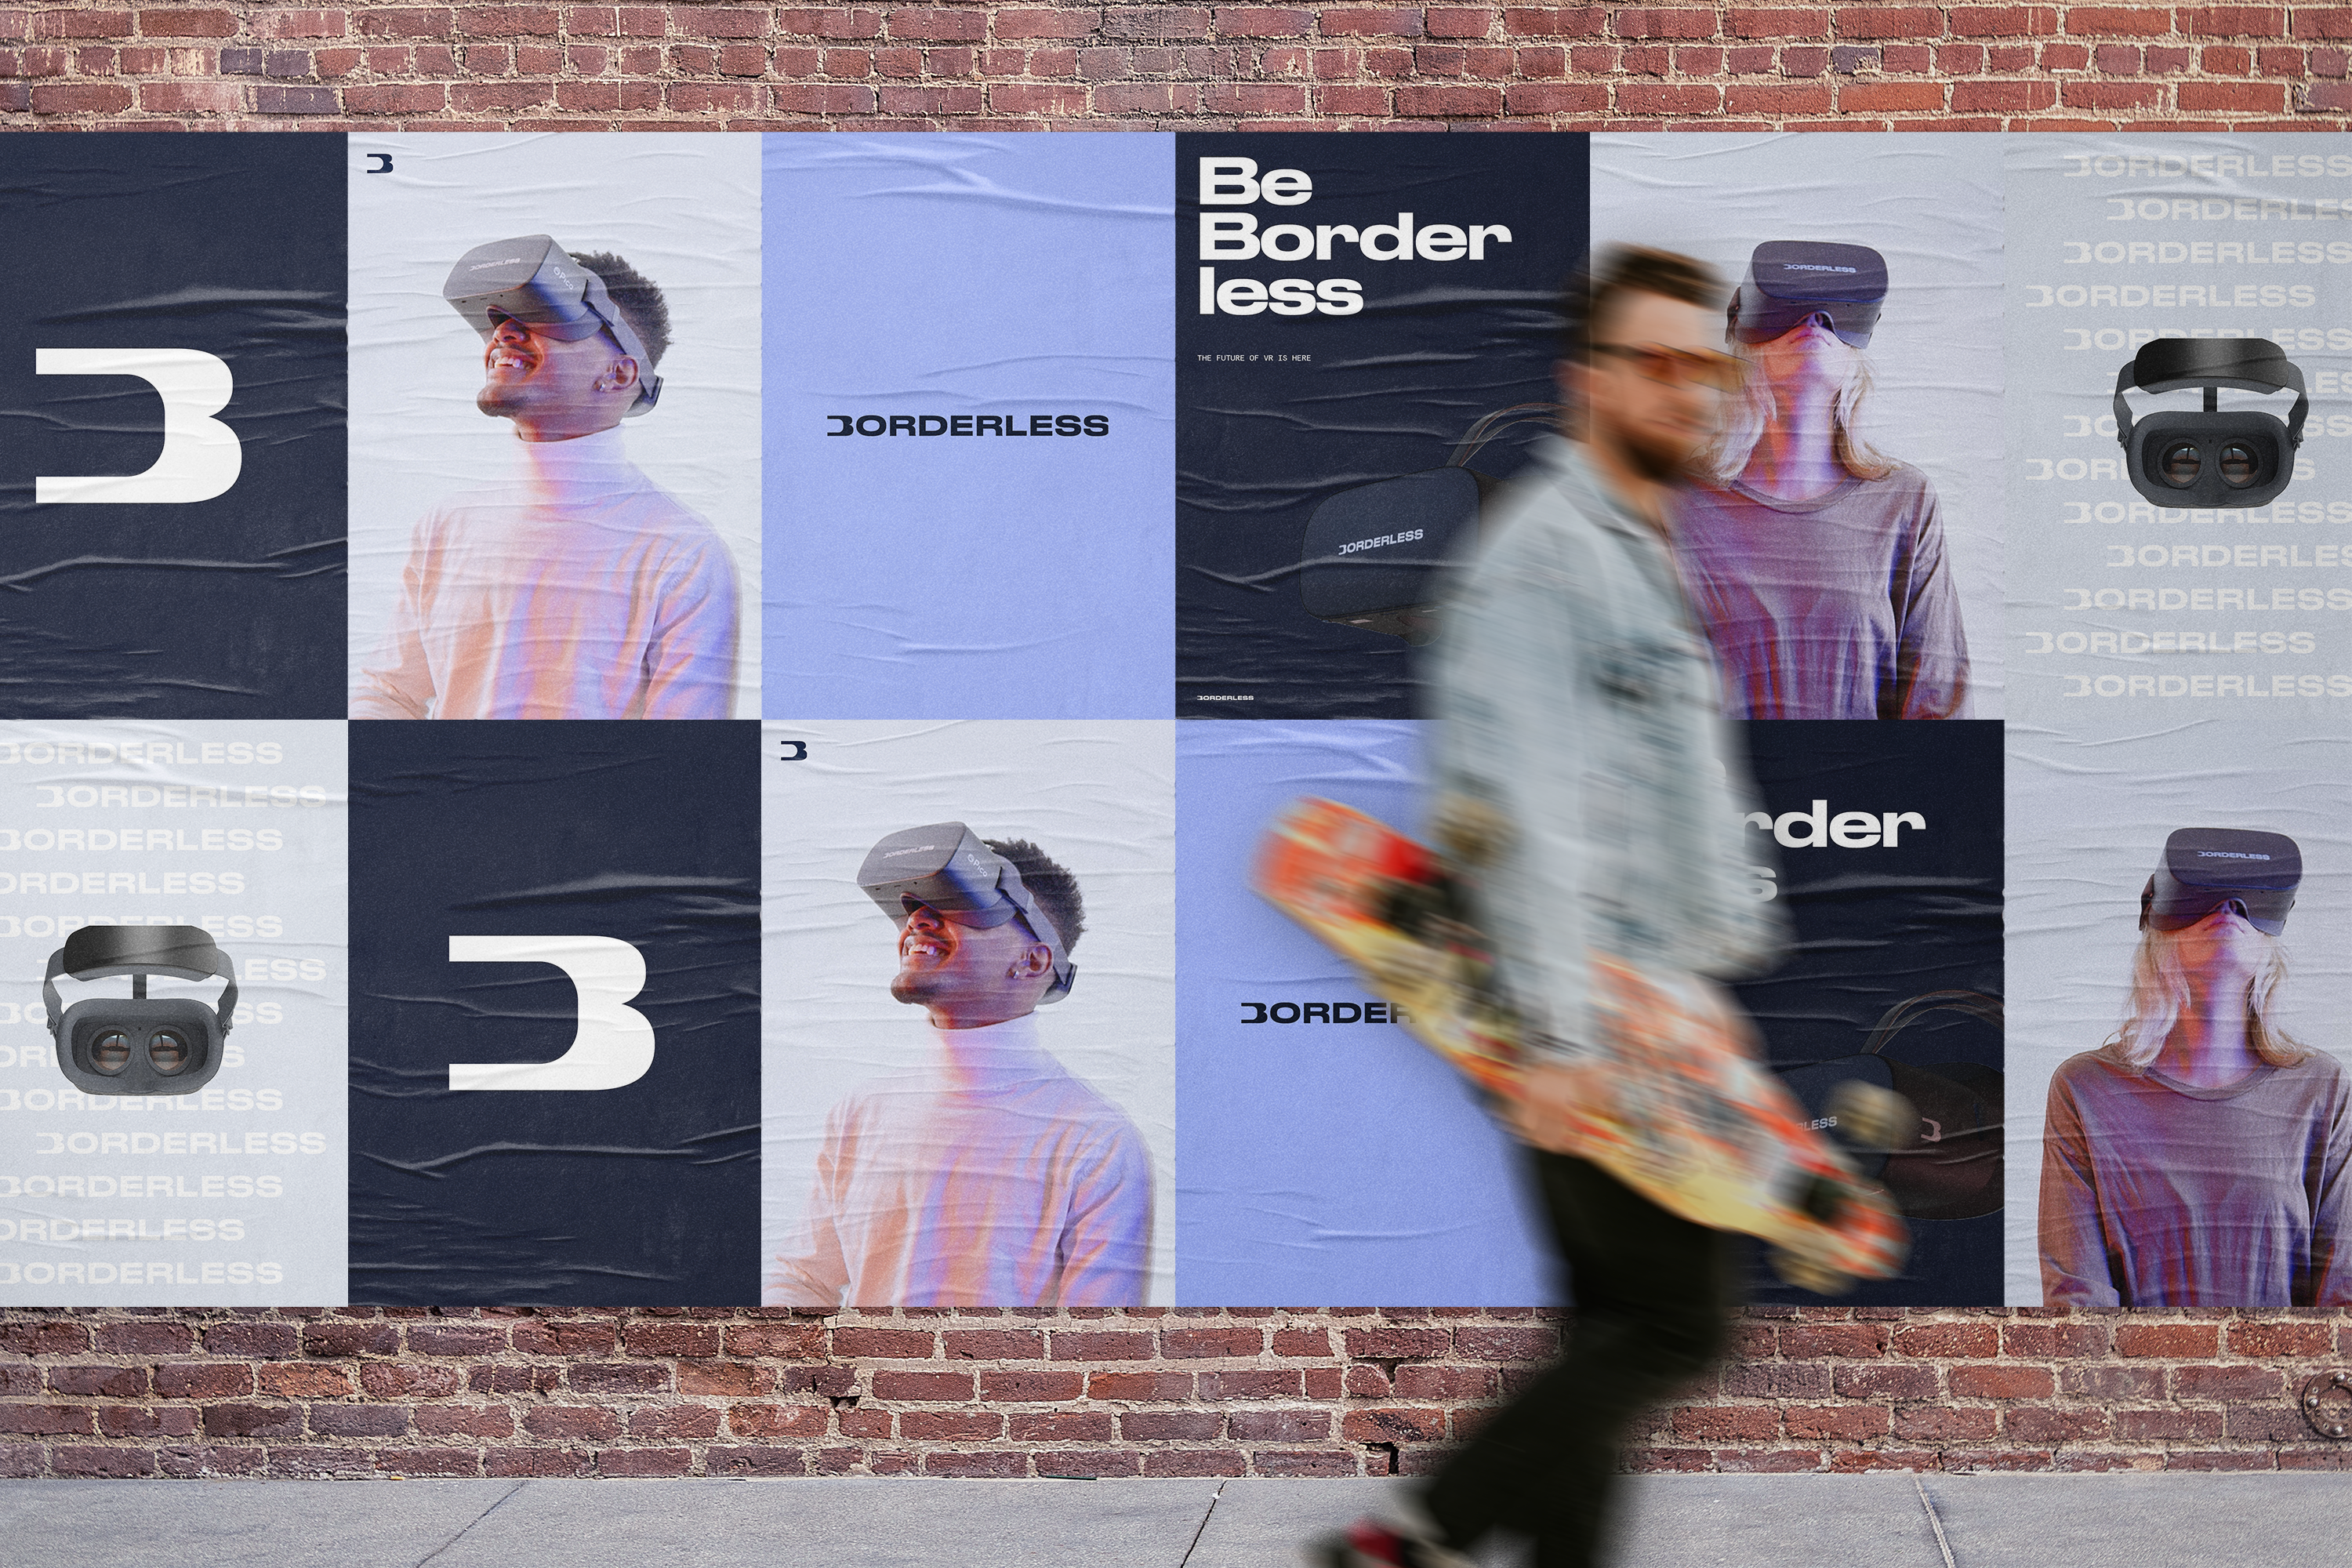 Posters of Borderless brand on brick wall